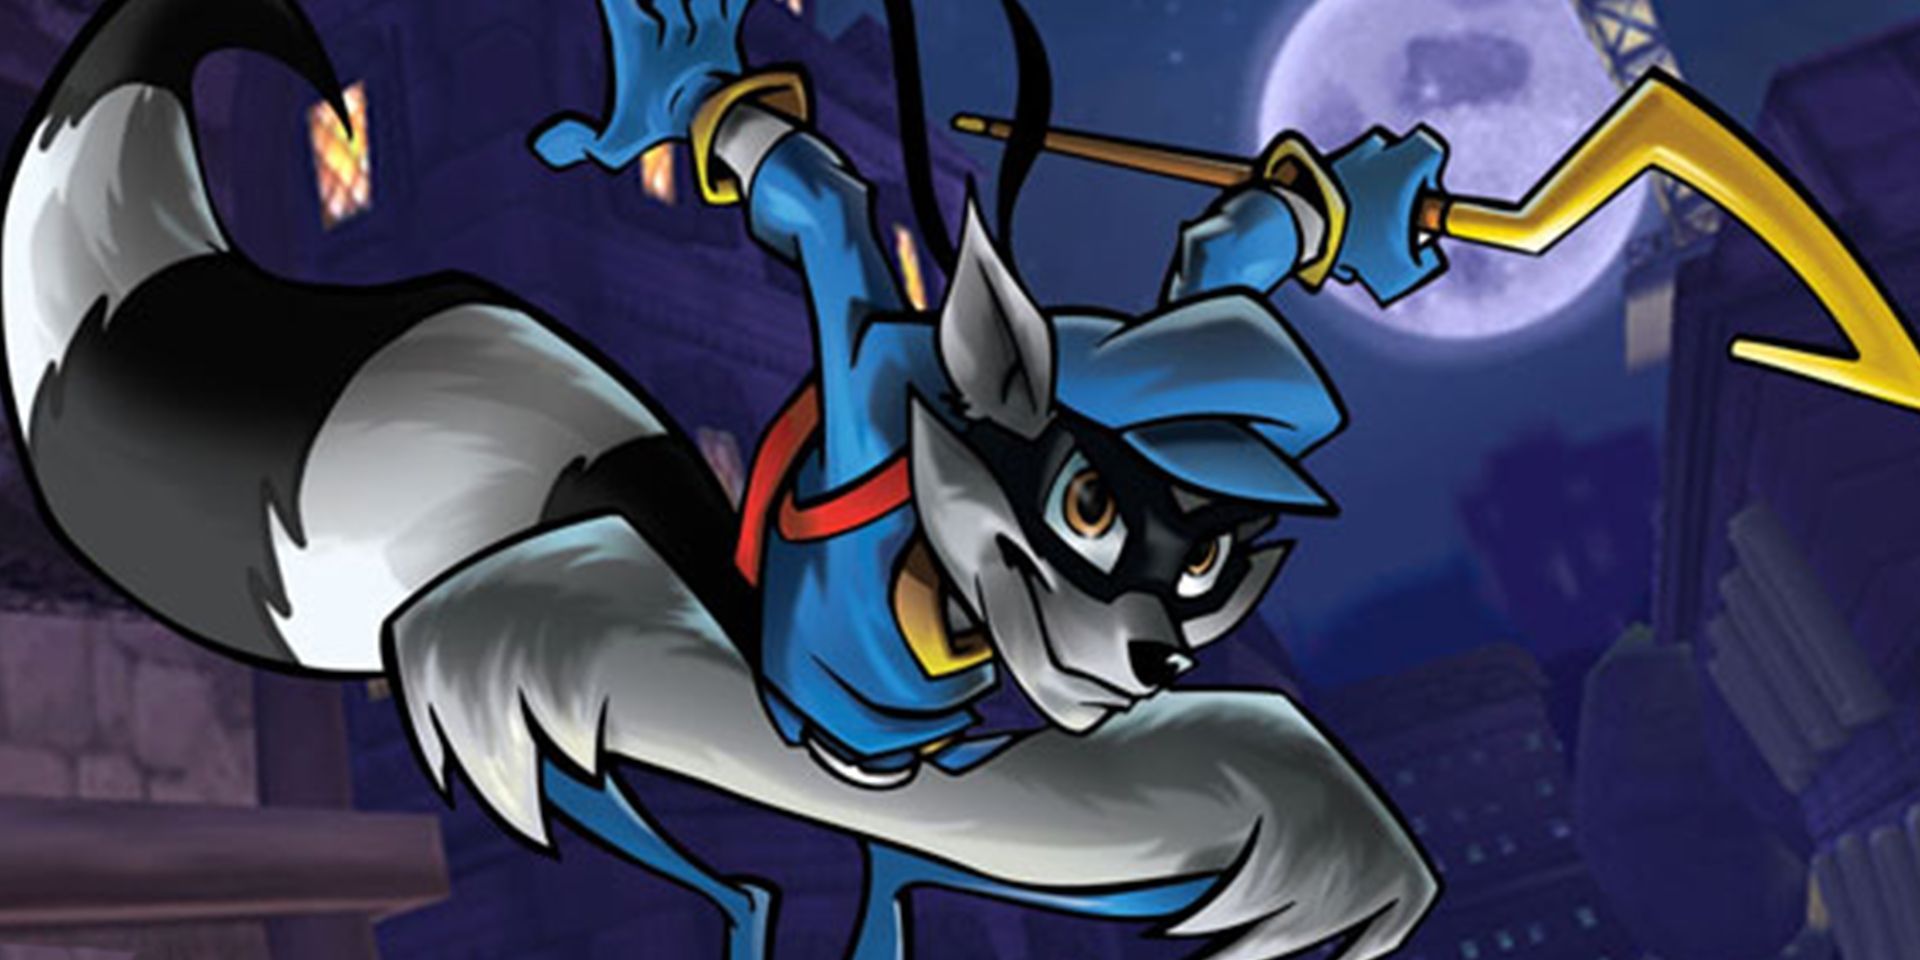 sly cooper from the sly cooper series